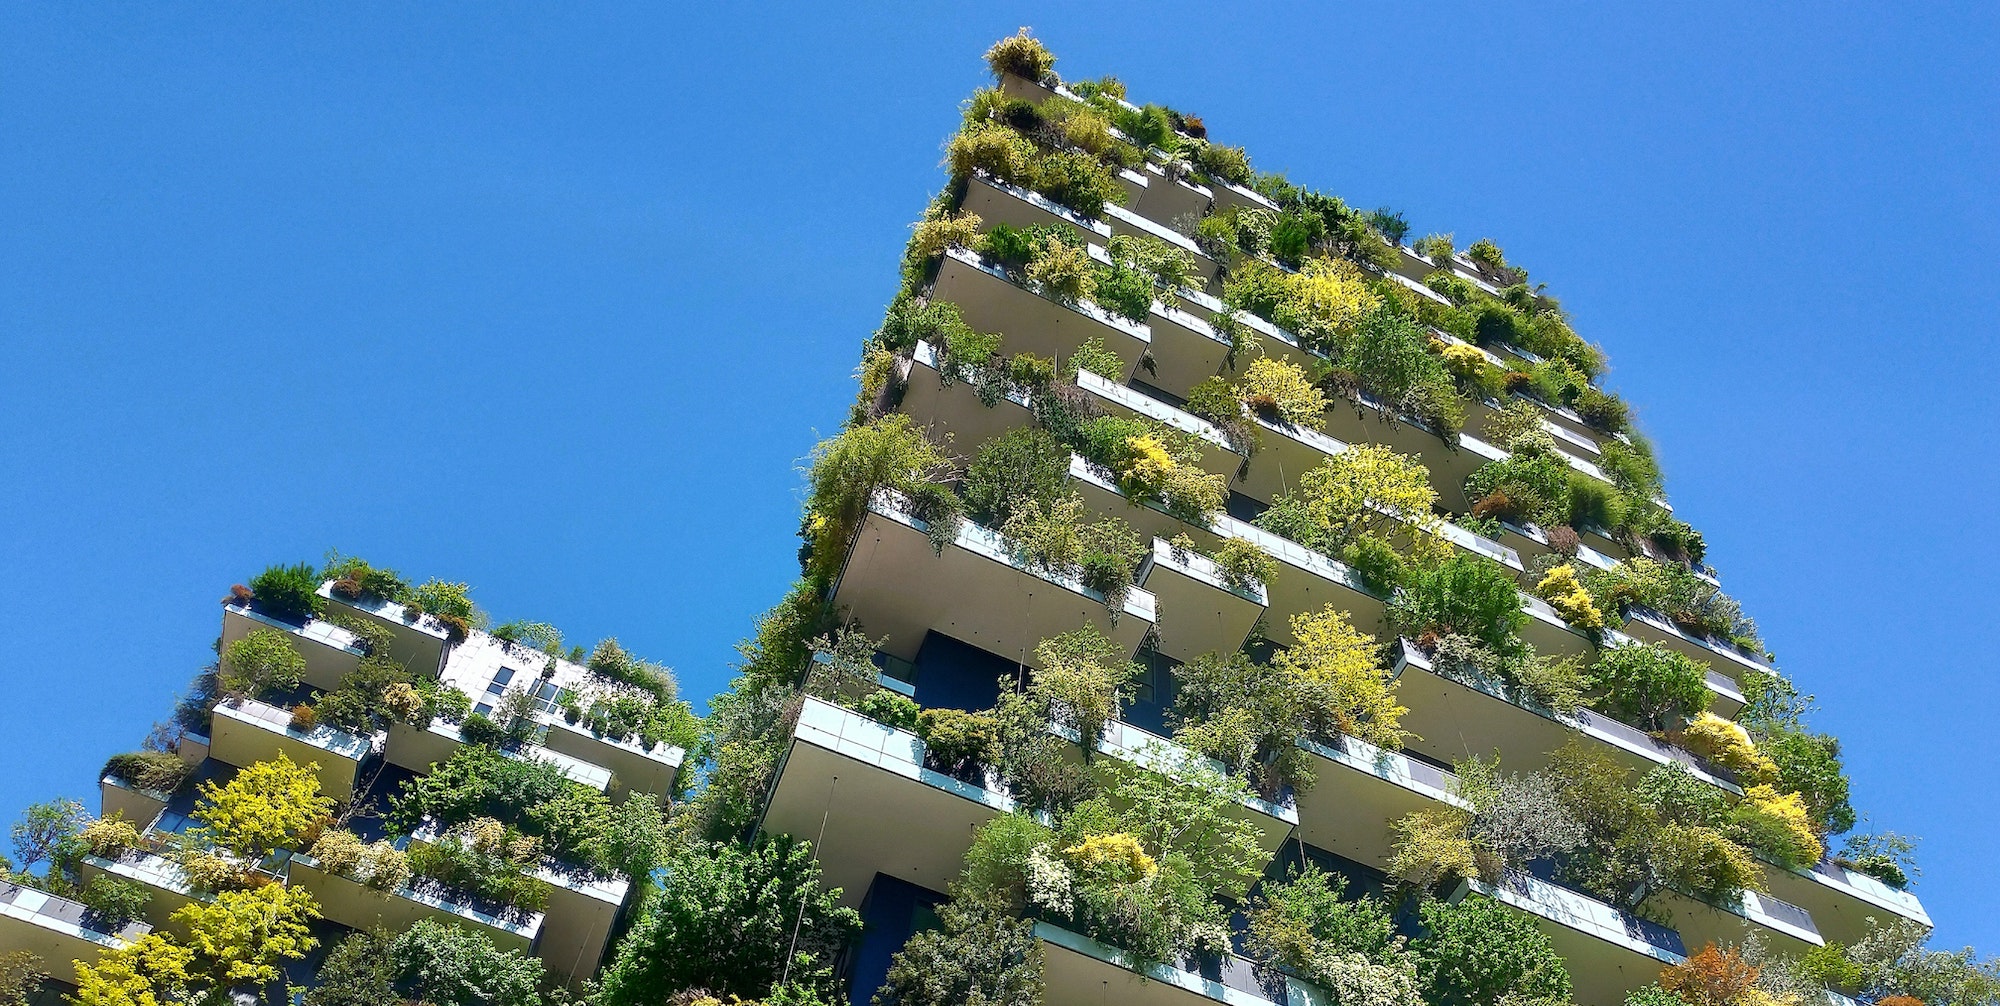 A photo of the Bosco Verticale, or Vertical Forest, in Milan, Italy.